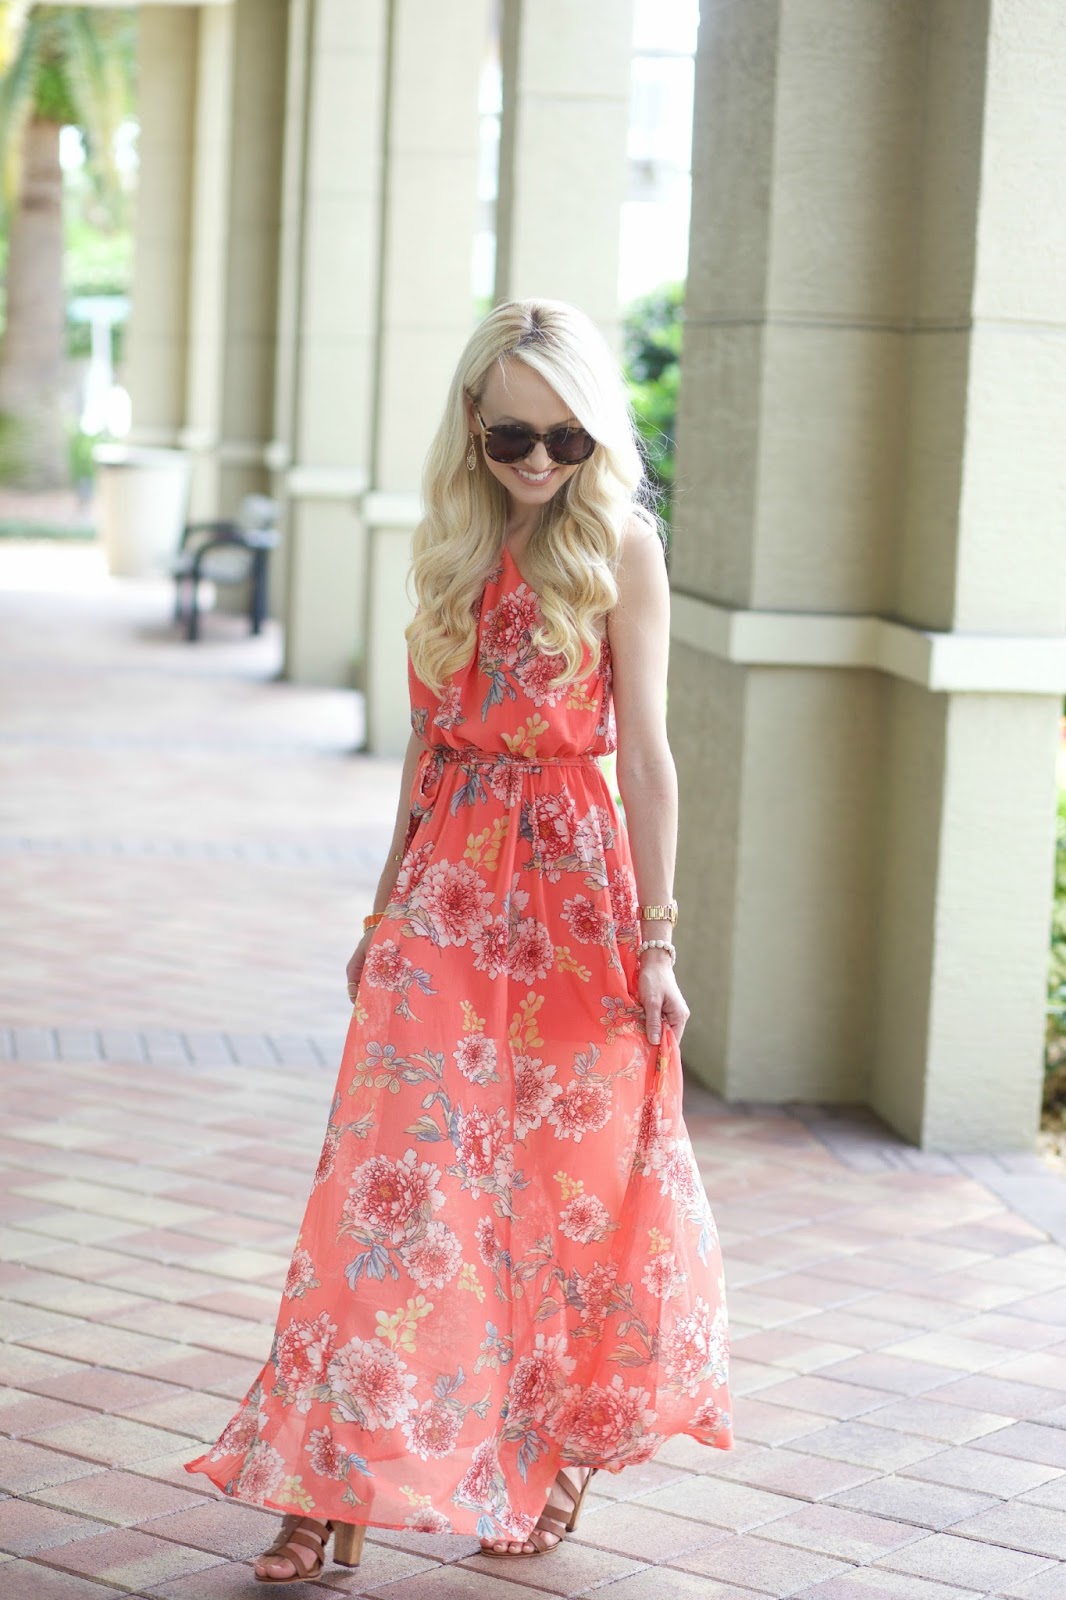 A Spoonful of Style: Floral Maxi Dress